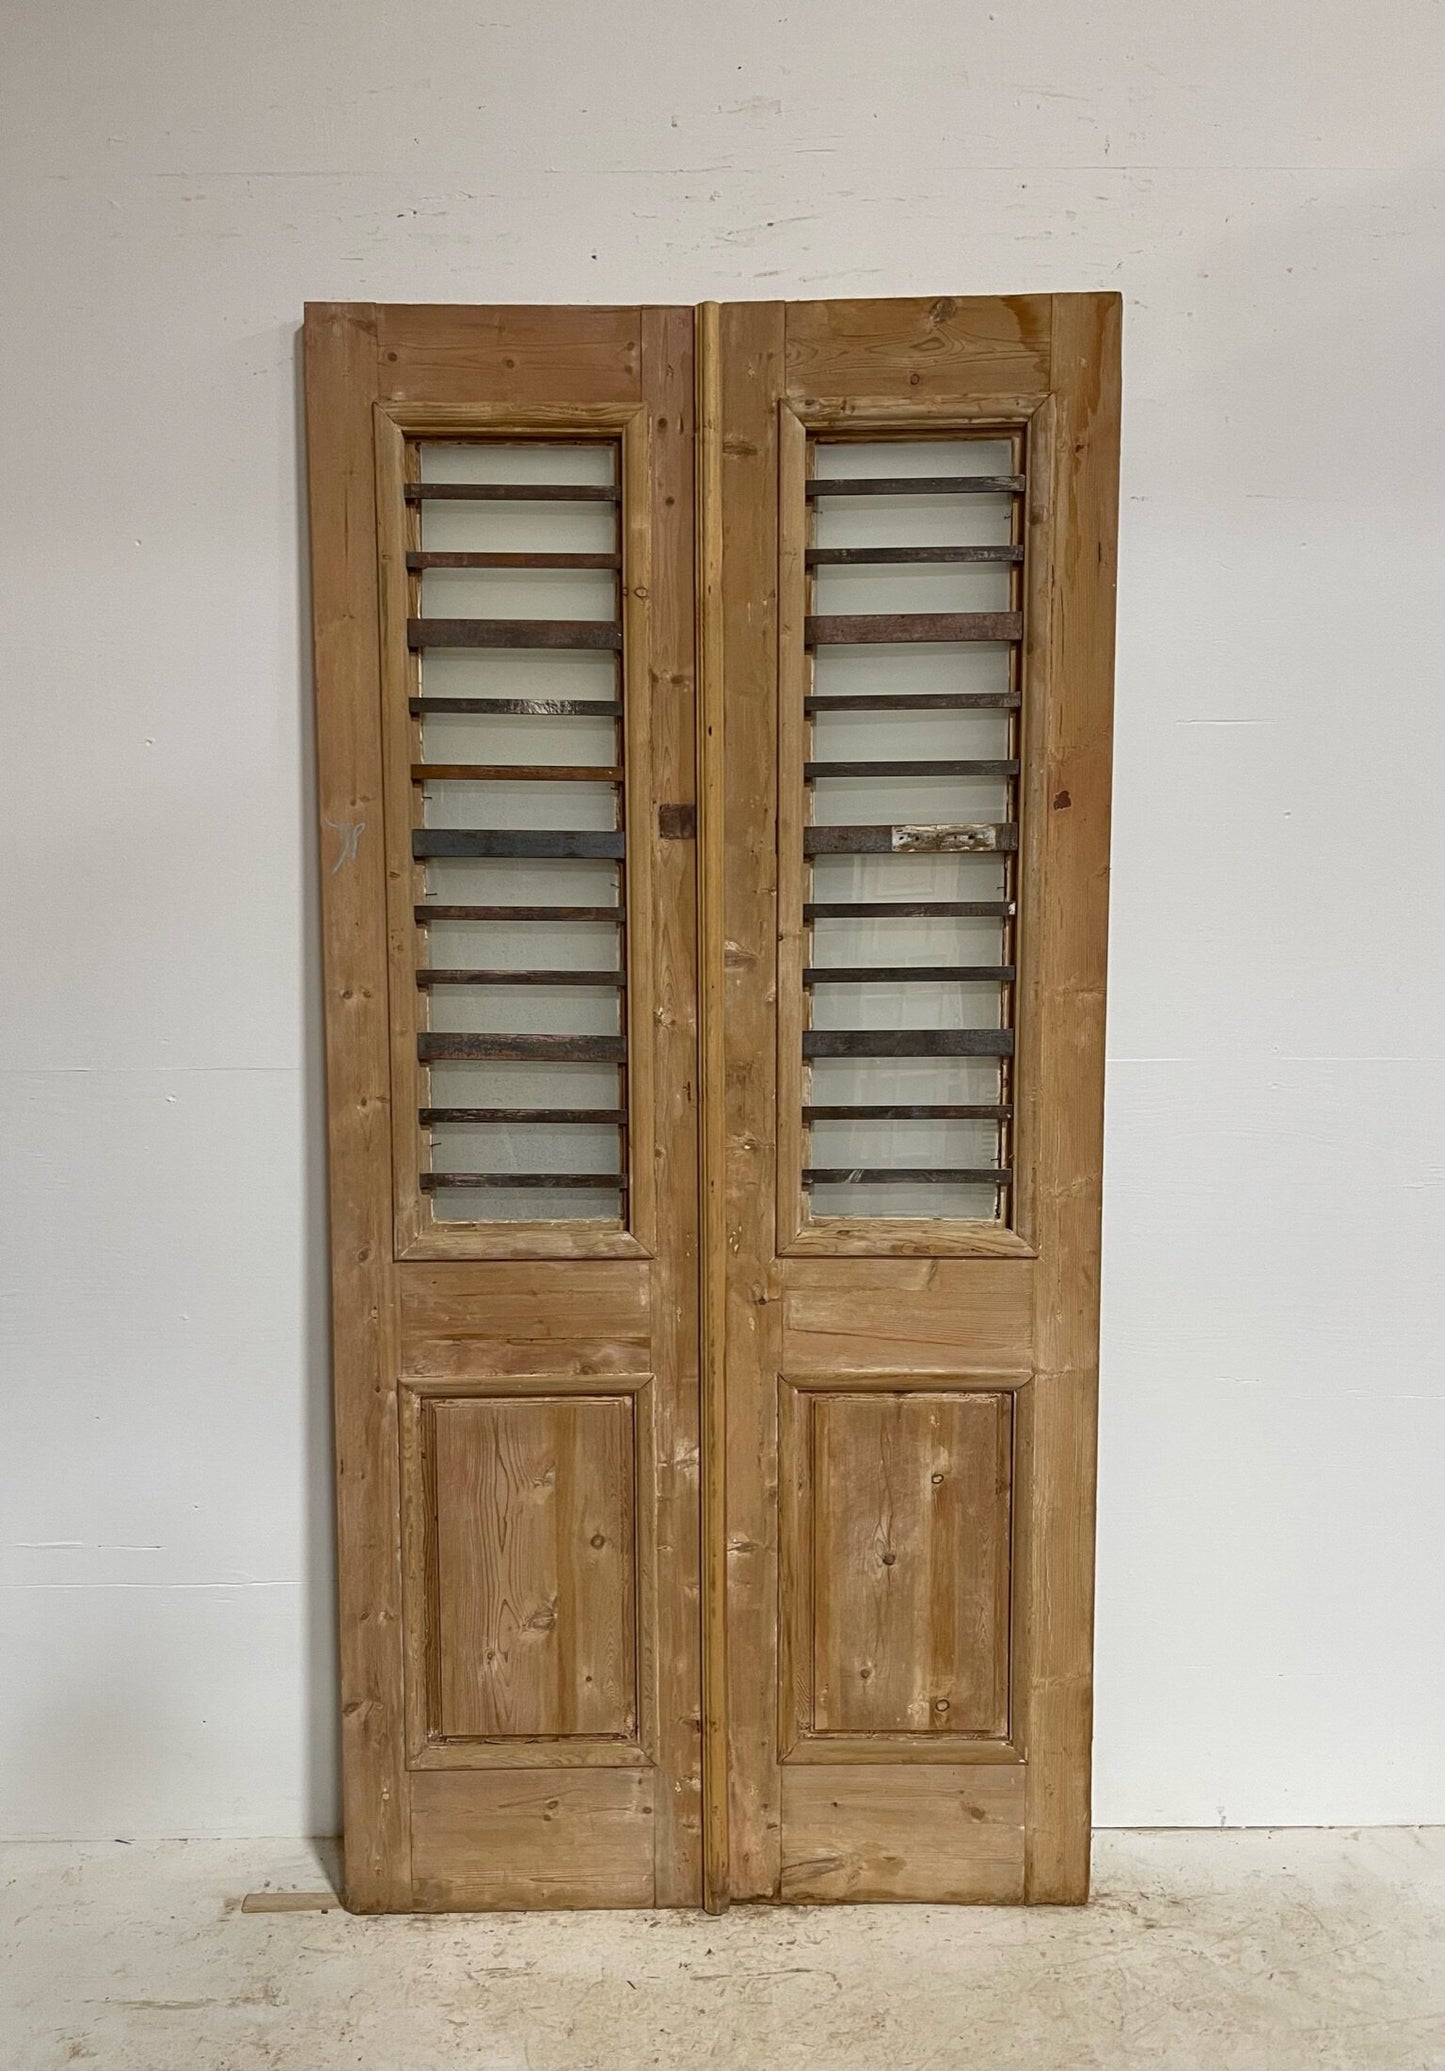 Antique French doors (88.75X43) with glass G1619